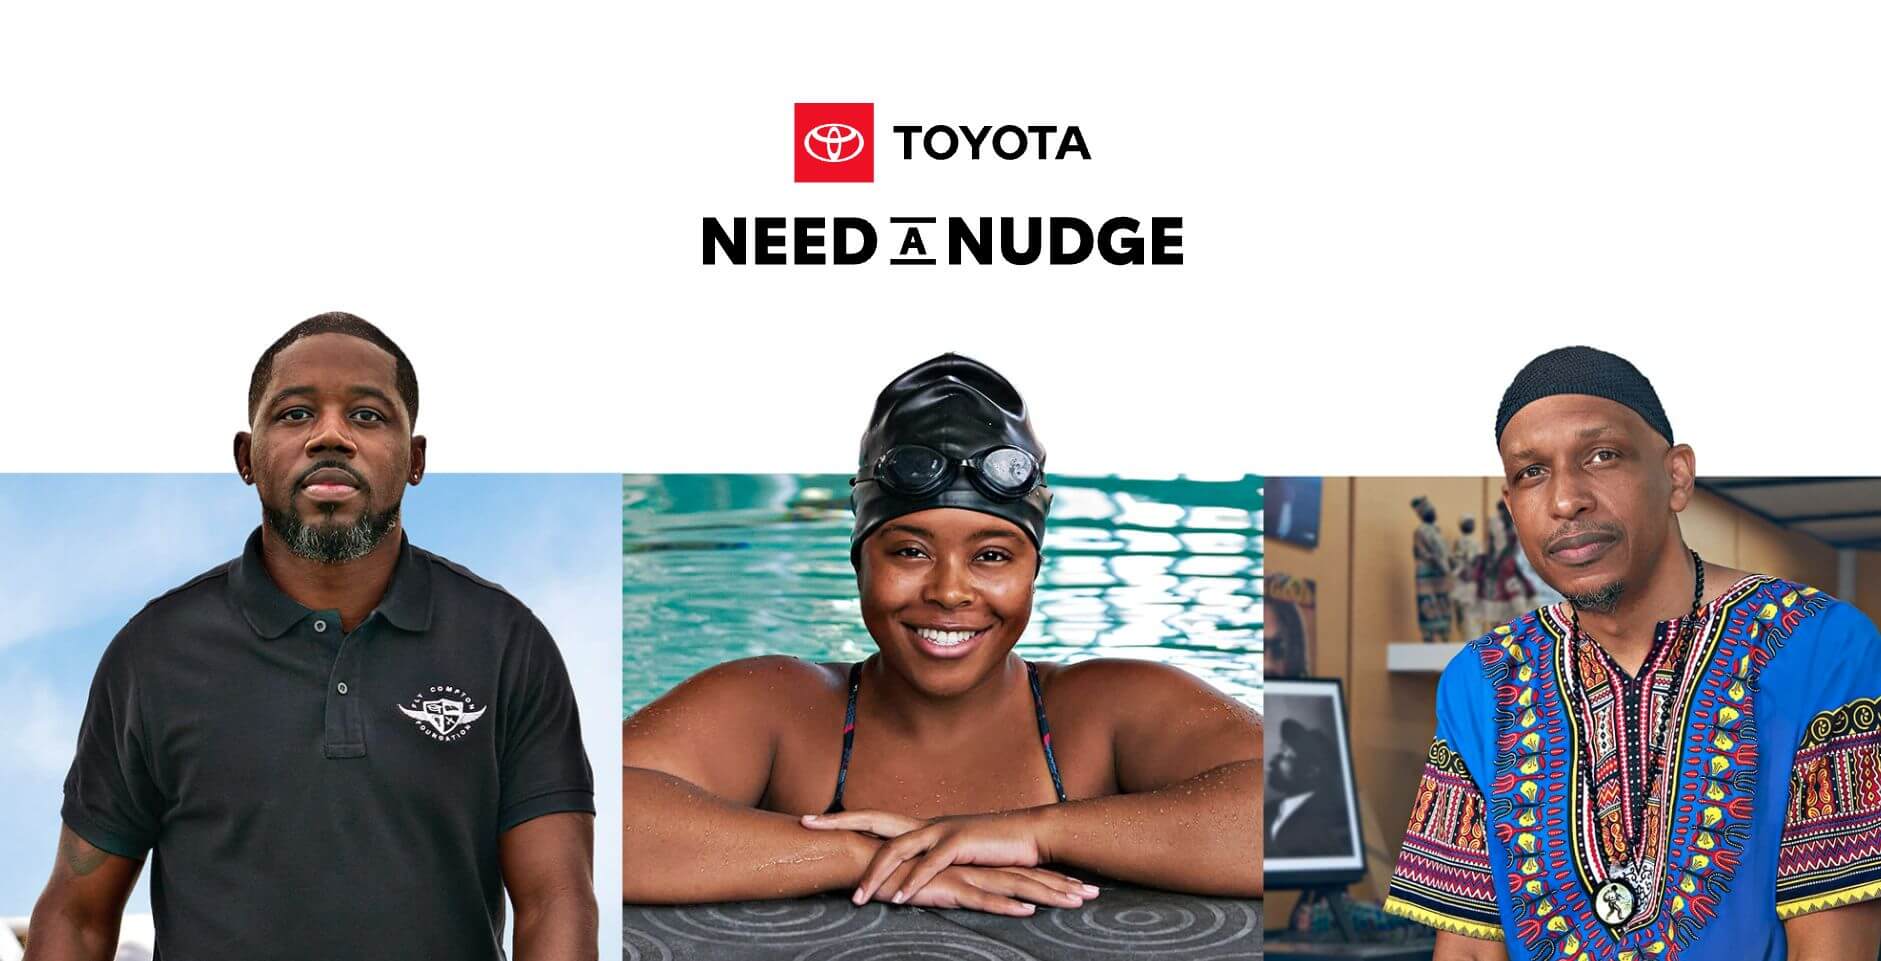 Toyota Need A Nudge Grant